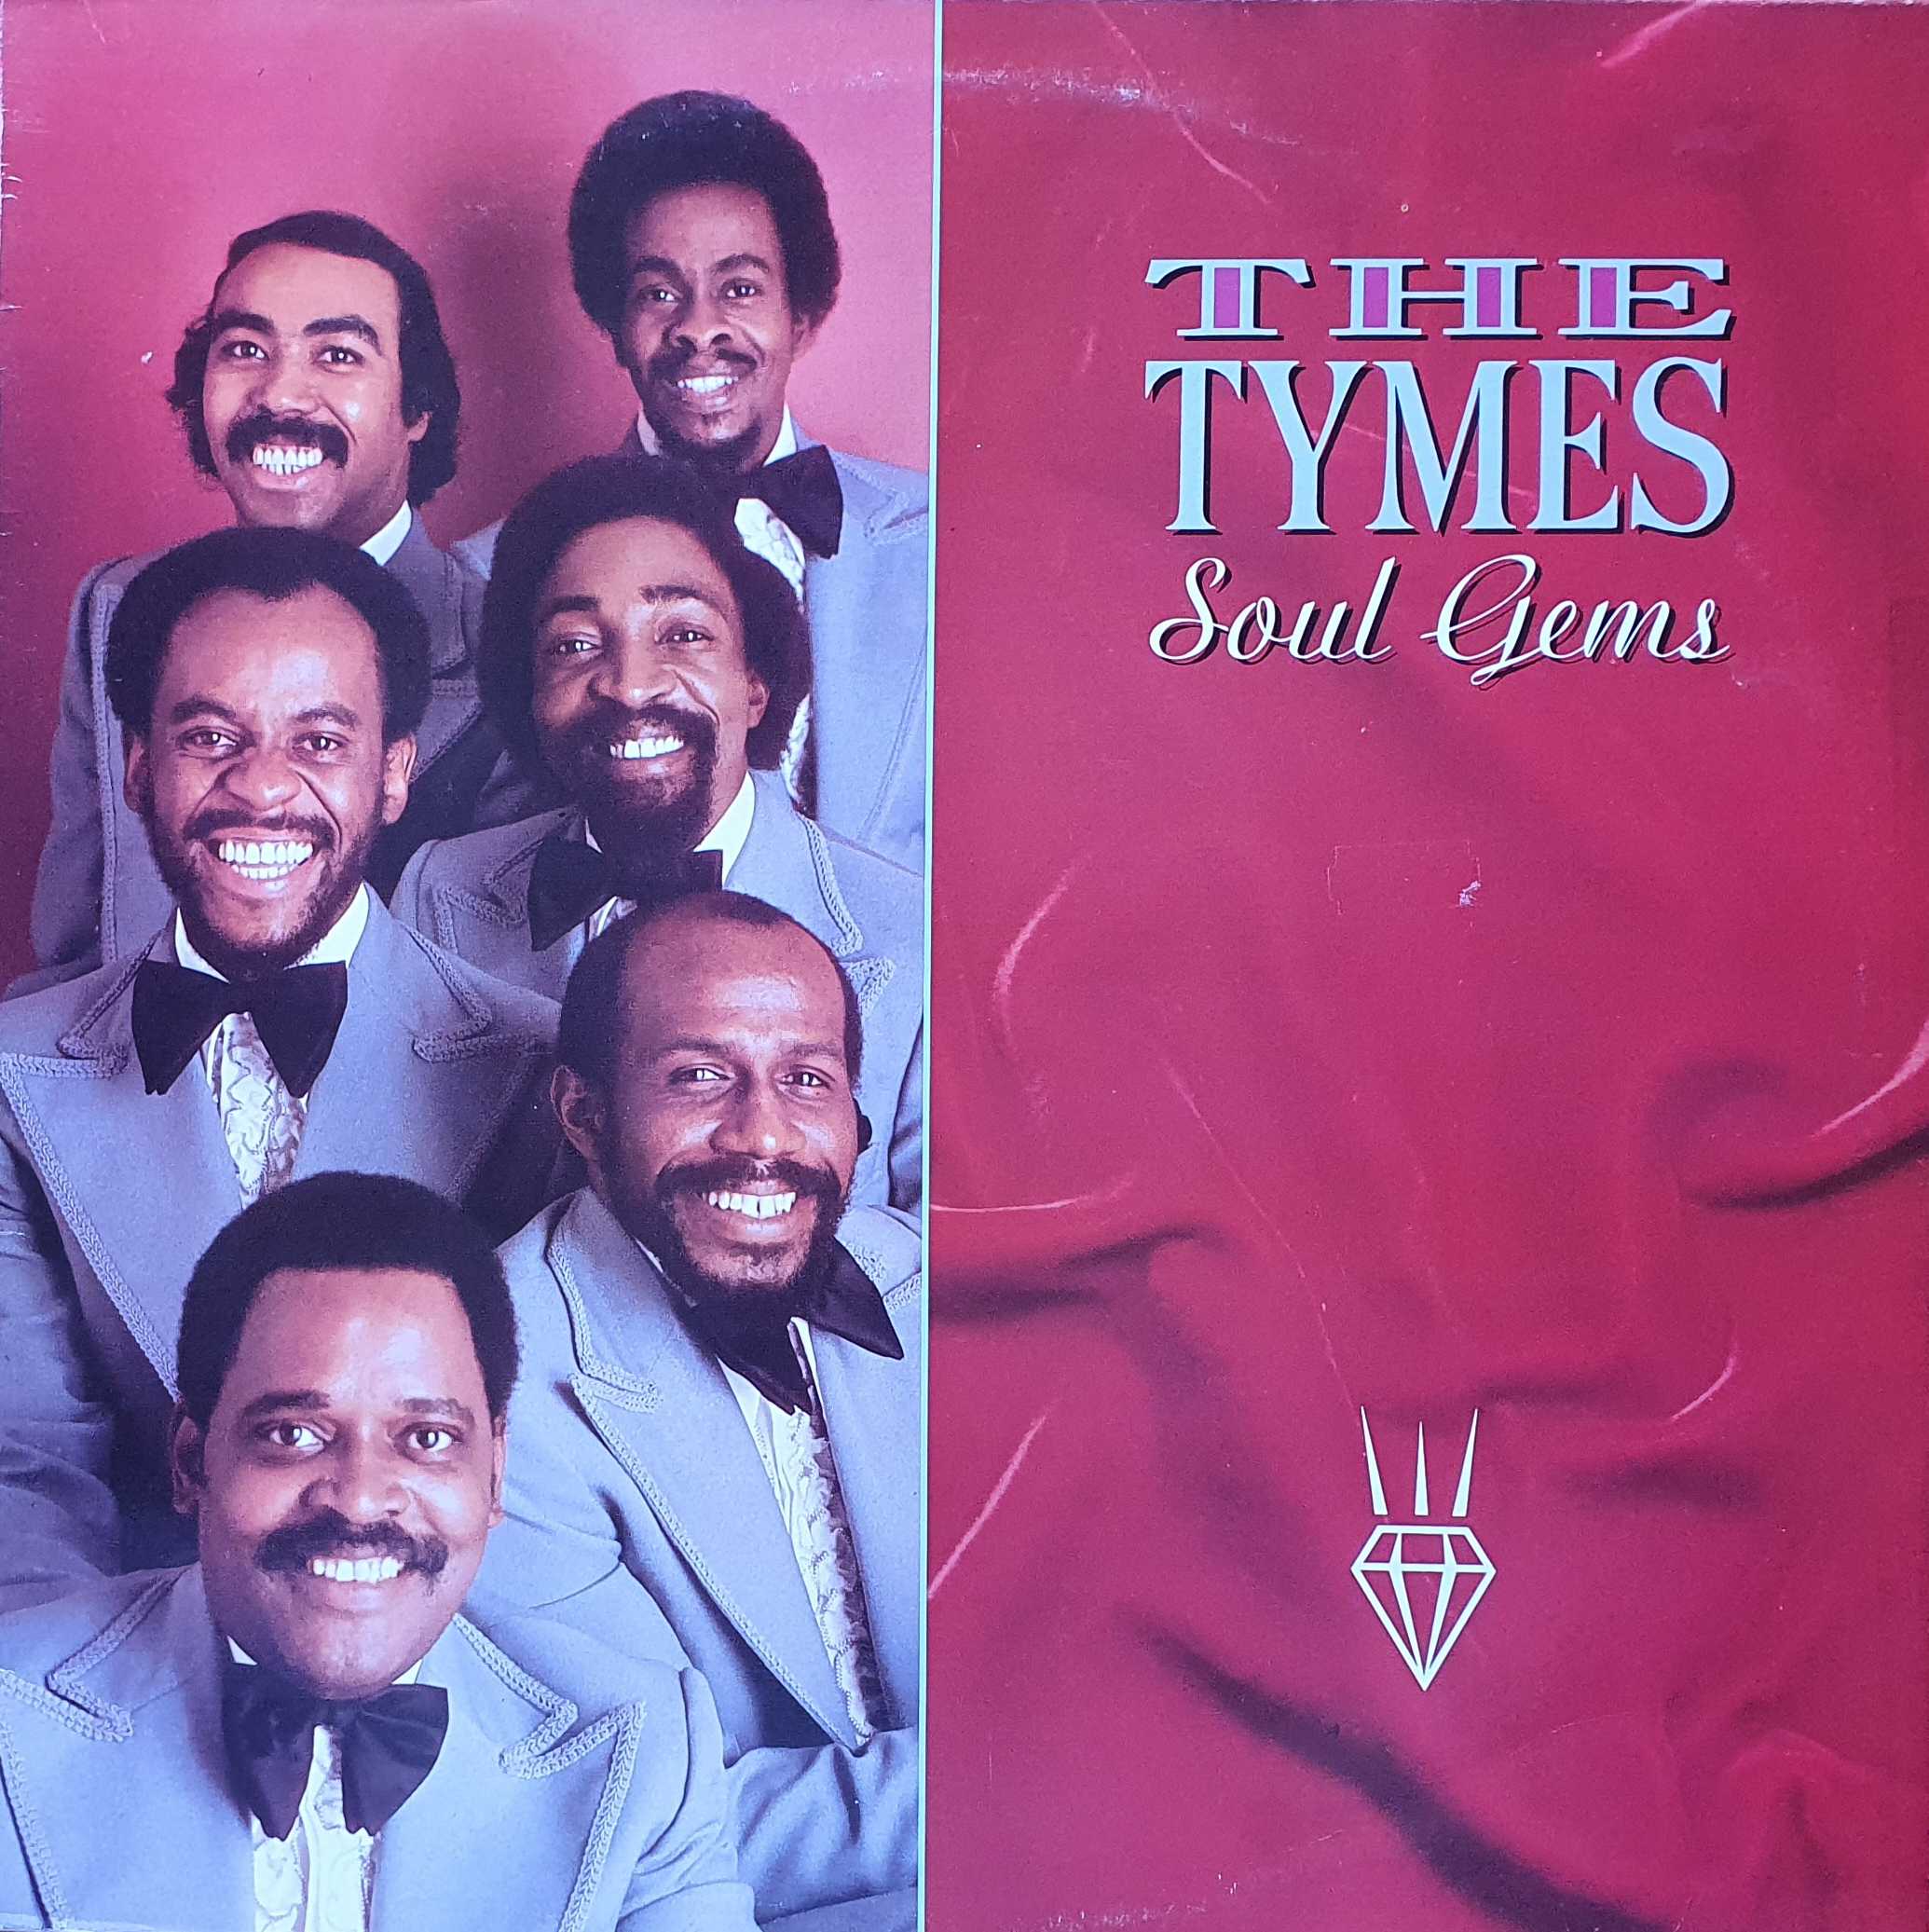 Picture of PRST 506 Soul gems by artist The Tymes from the BBC albums - Records and Tapes library